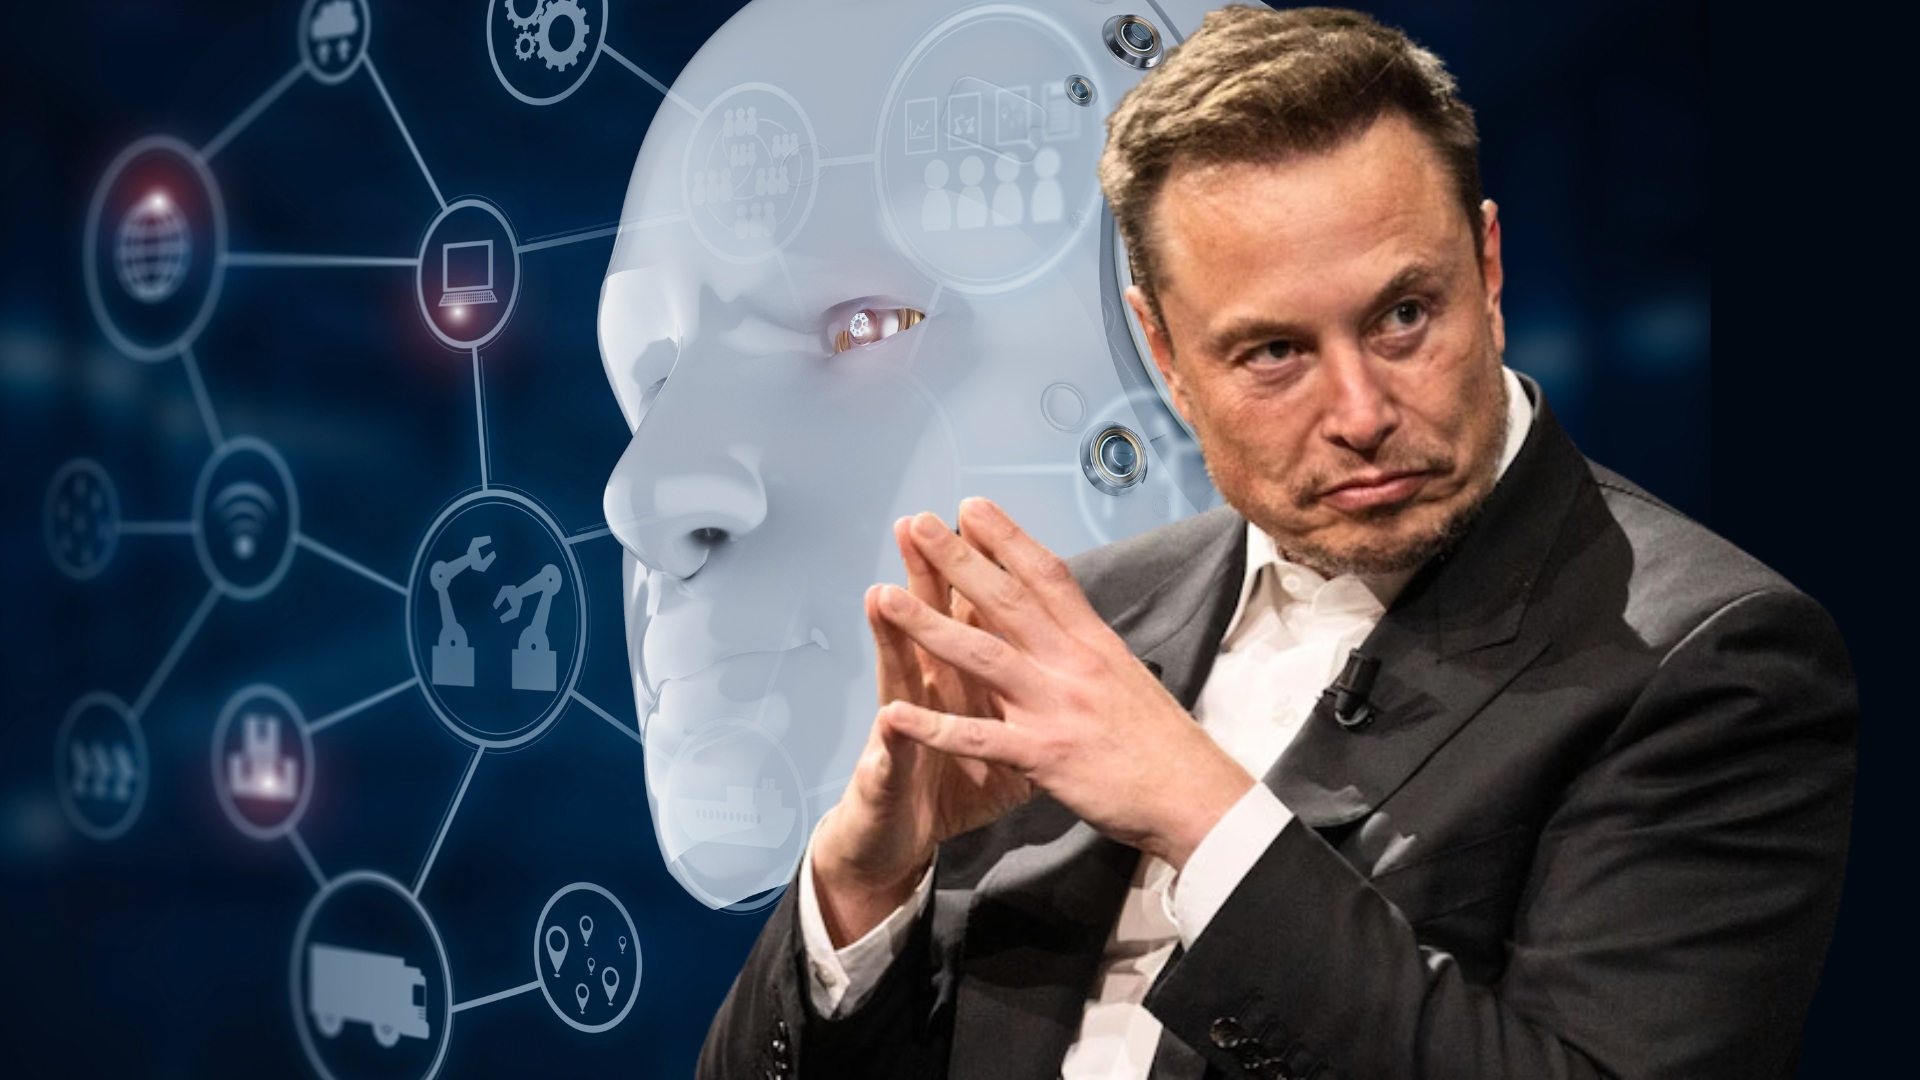 Elon Musk: “AI will probably be smarter than any human next year.”